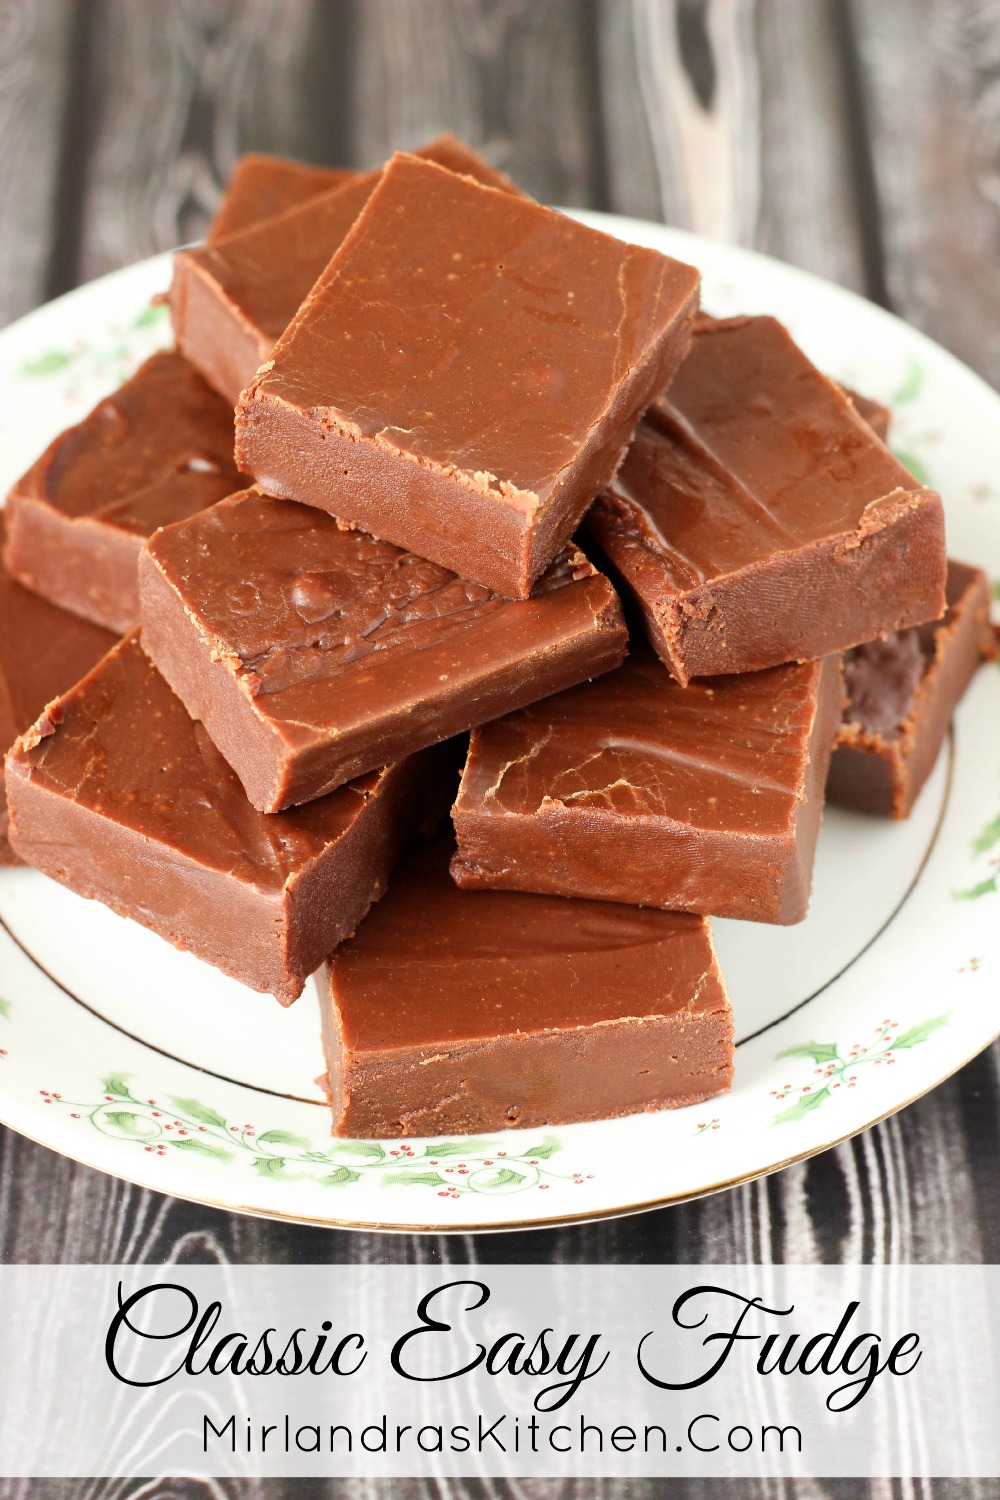 This wonderful, simple fudge is based off the original Kraft Fantasy Fudge recipe I grew up with. No candy thermometer needed. Perfect results every time.